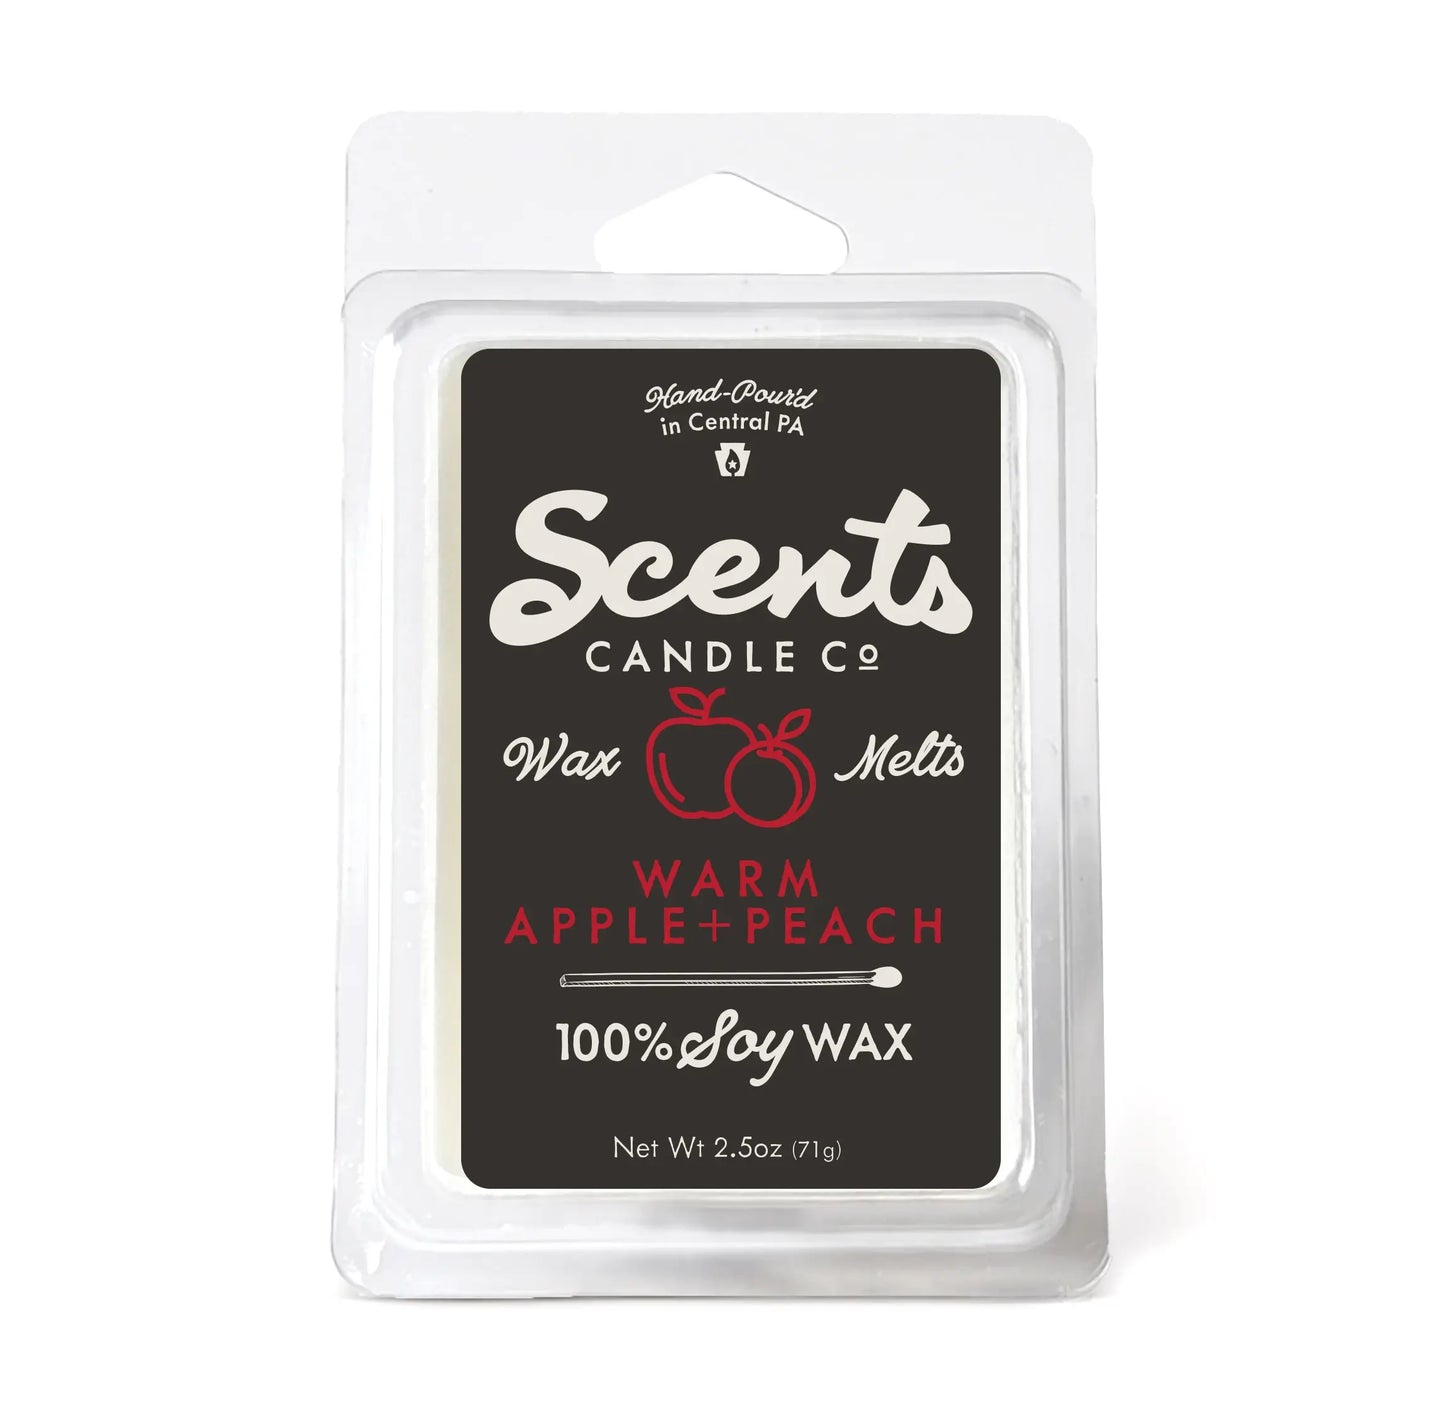 Scents Candle Co. Warm Apple + Peach Wax Melt